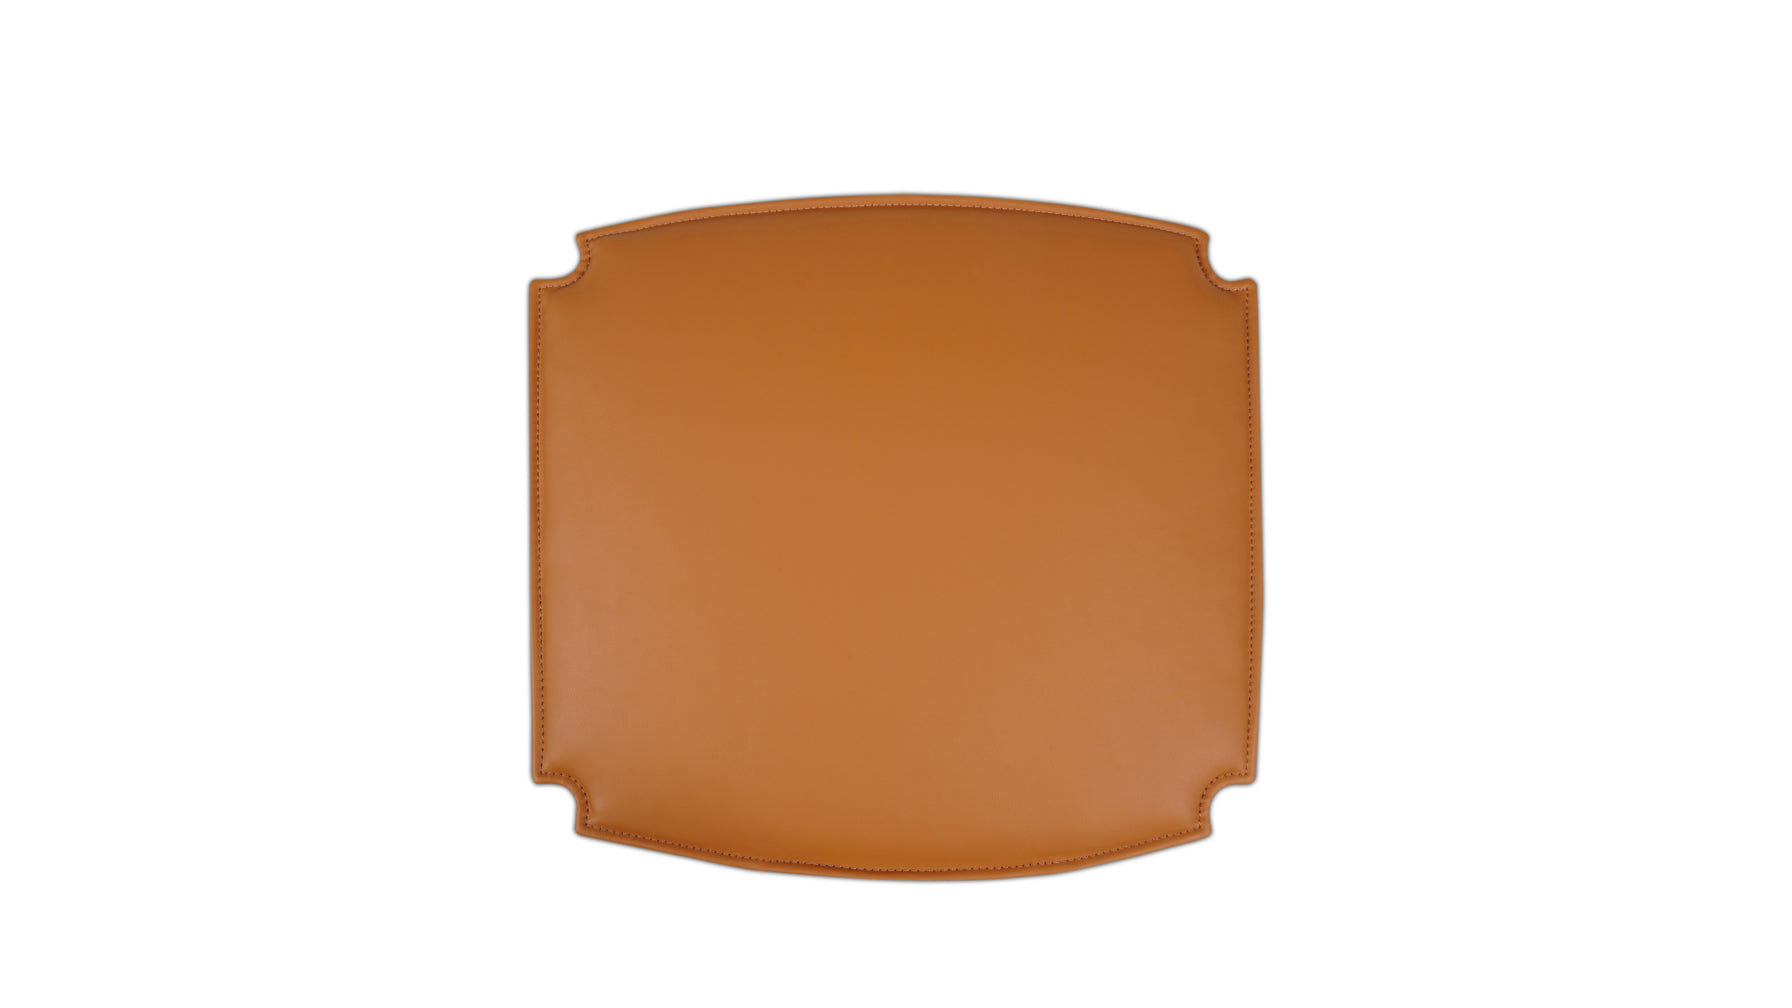 Seat Cushion - Tuck In Dining Chair, Cognac - Image 4